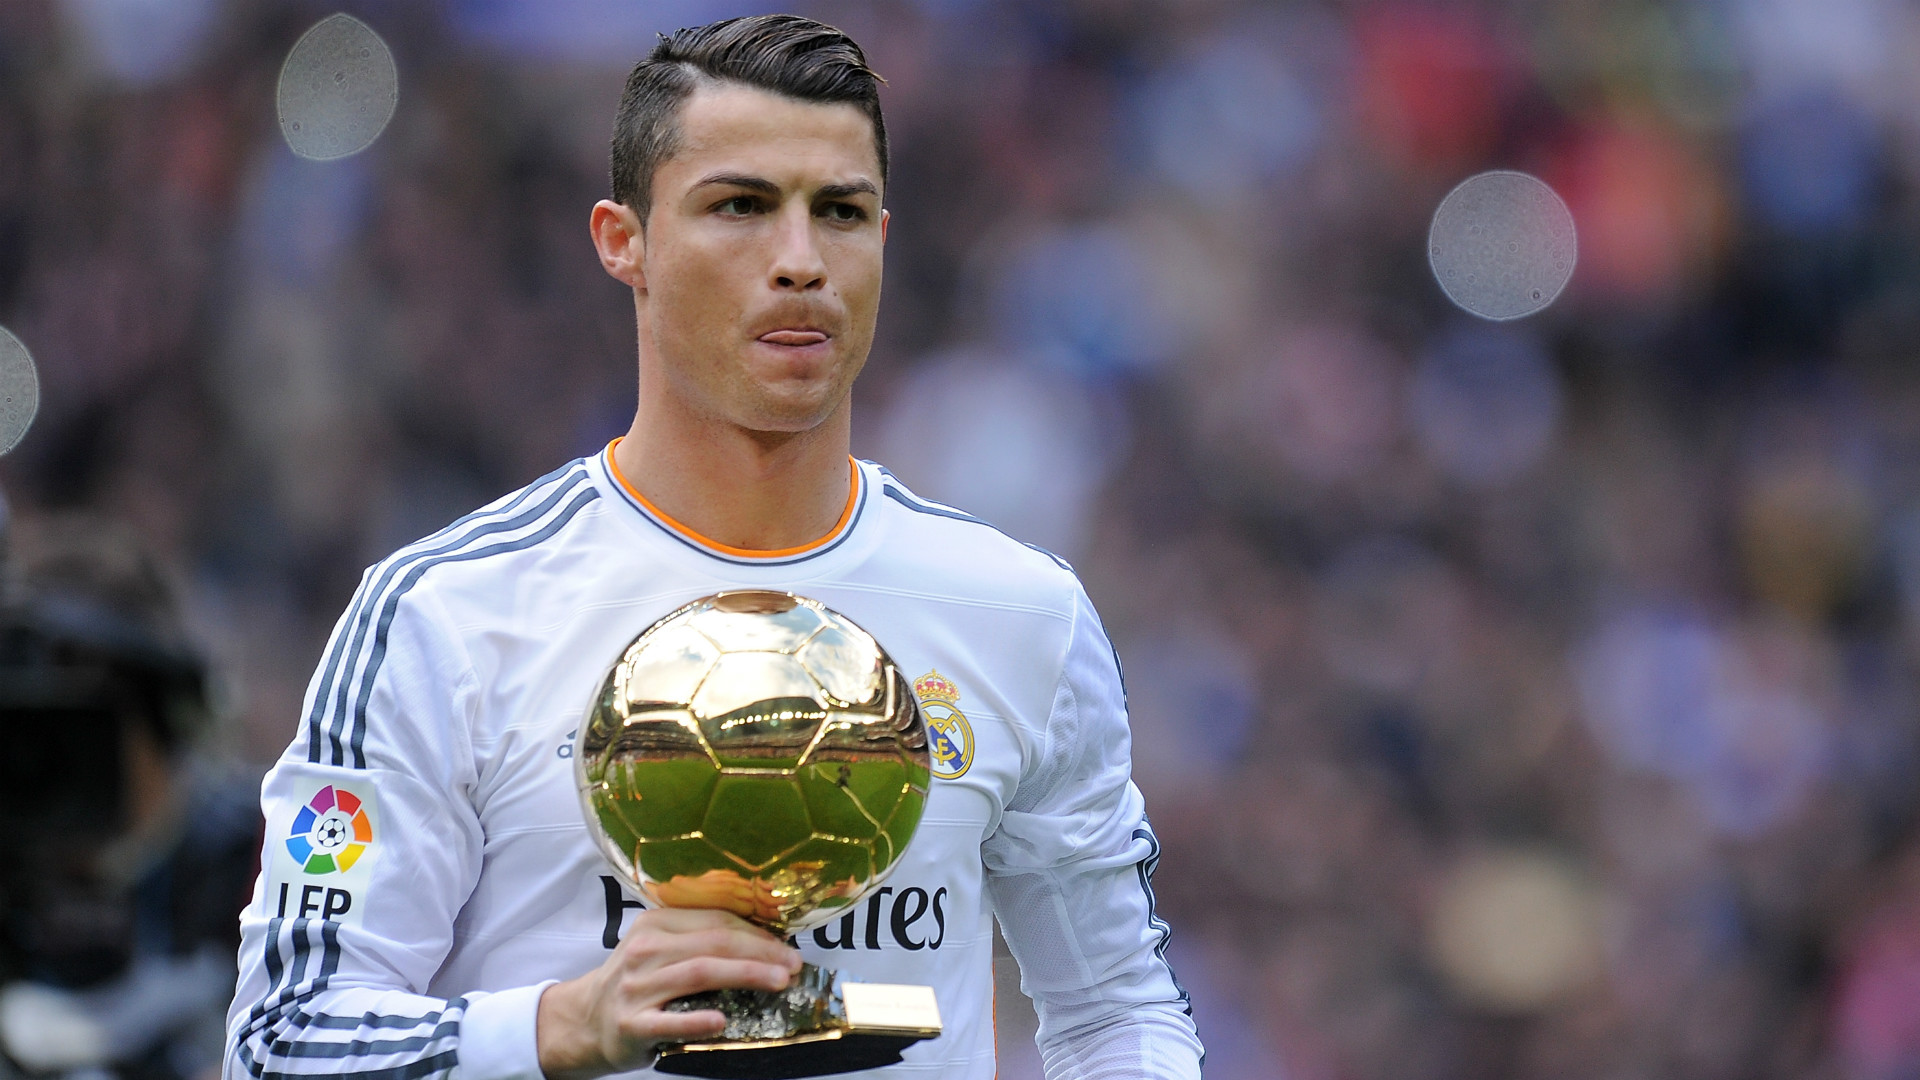 Ballon d'Or When will this year's winner be revealed?